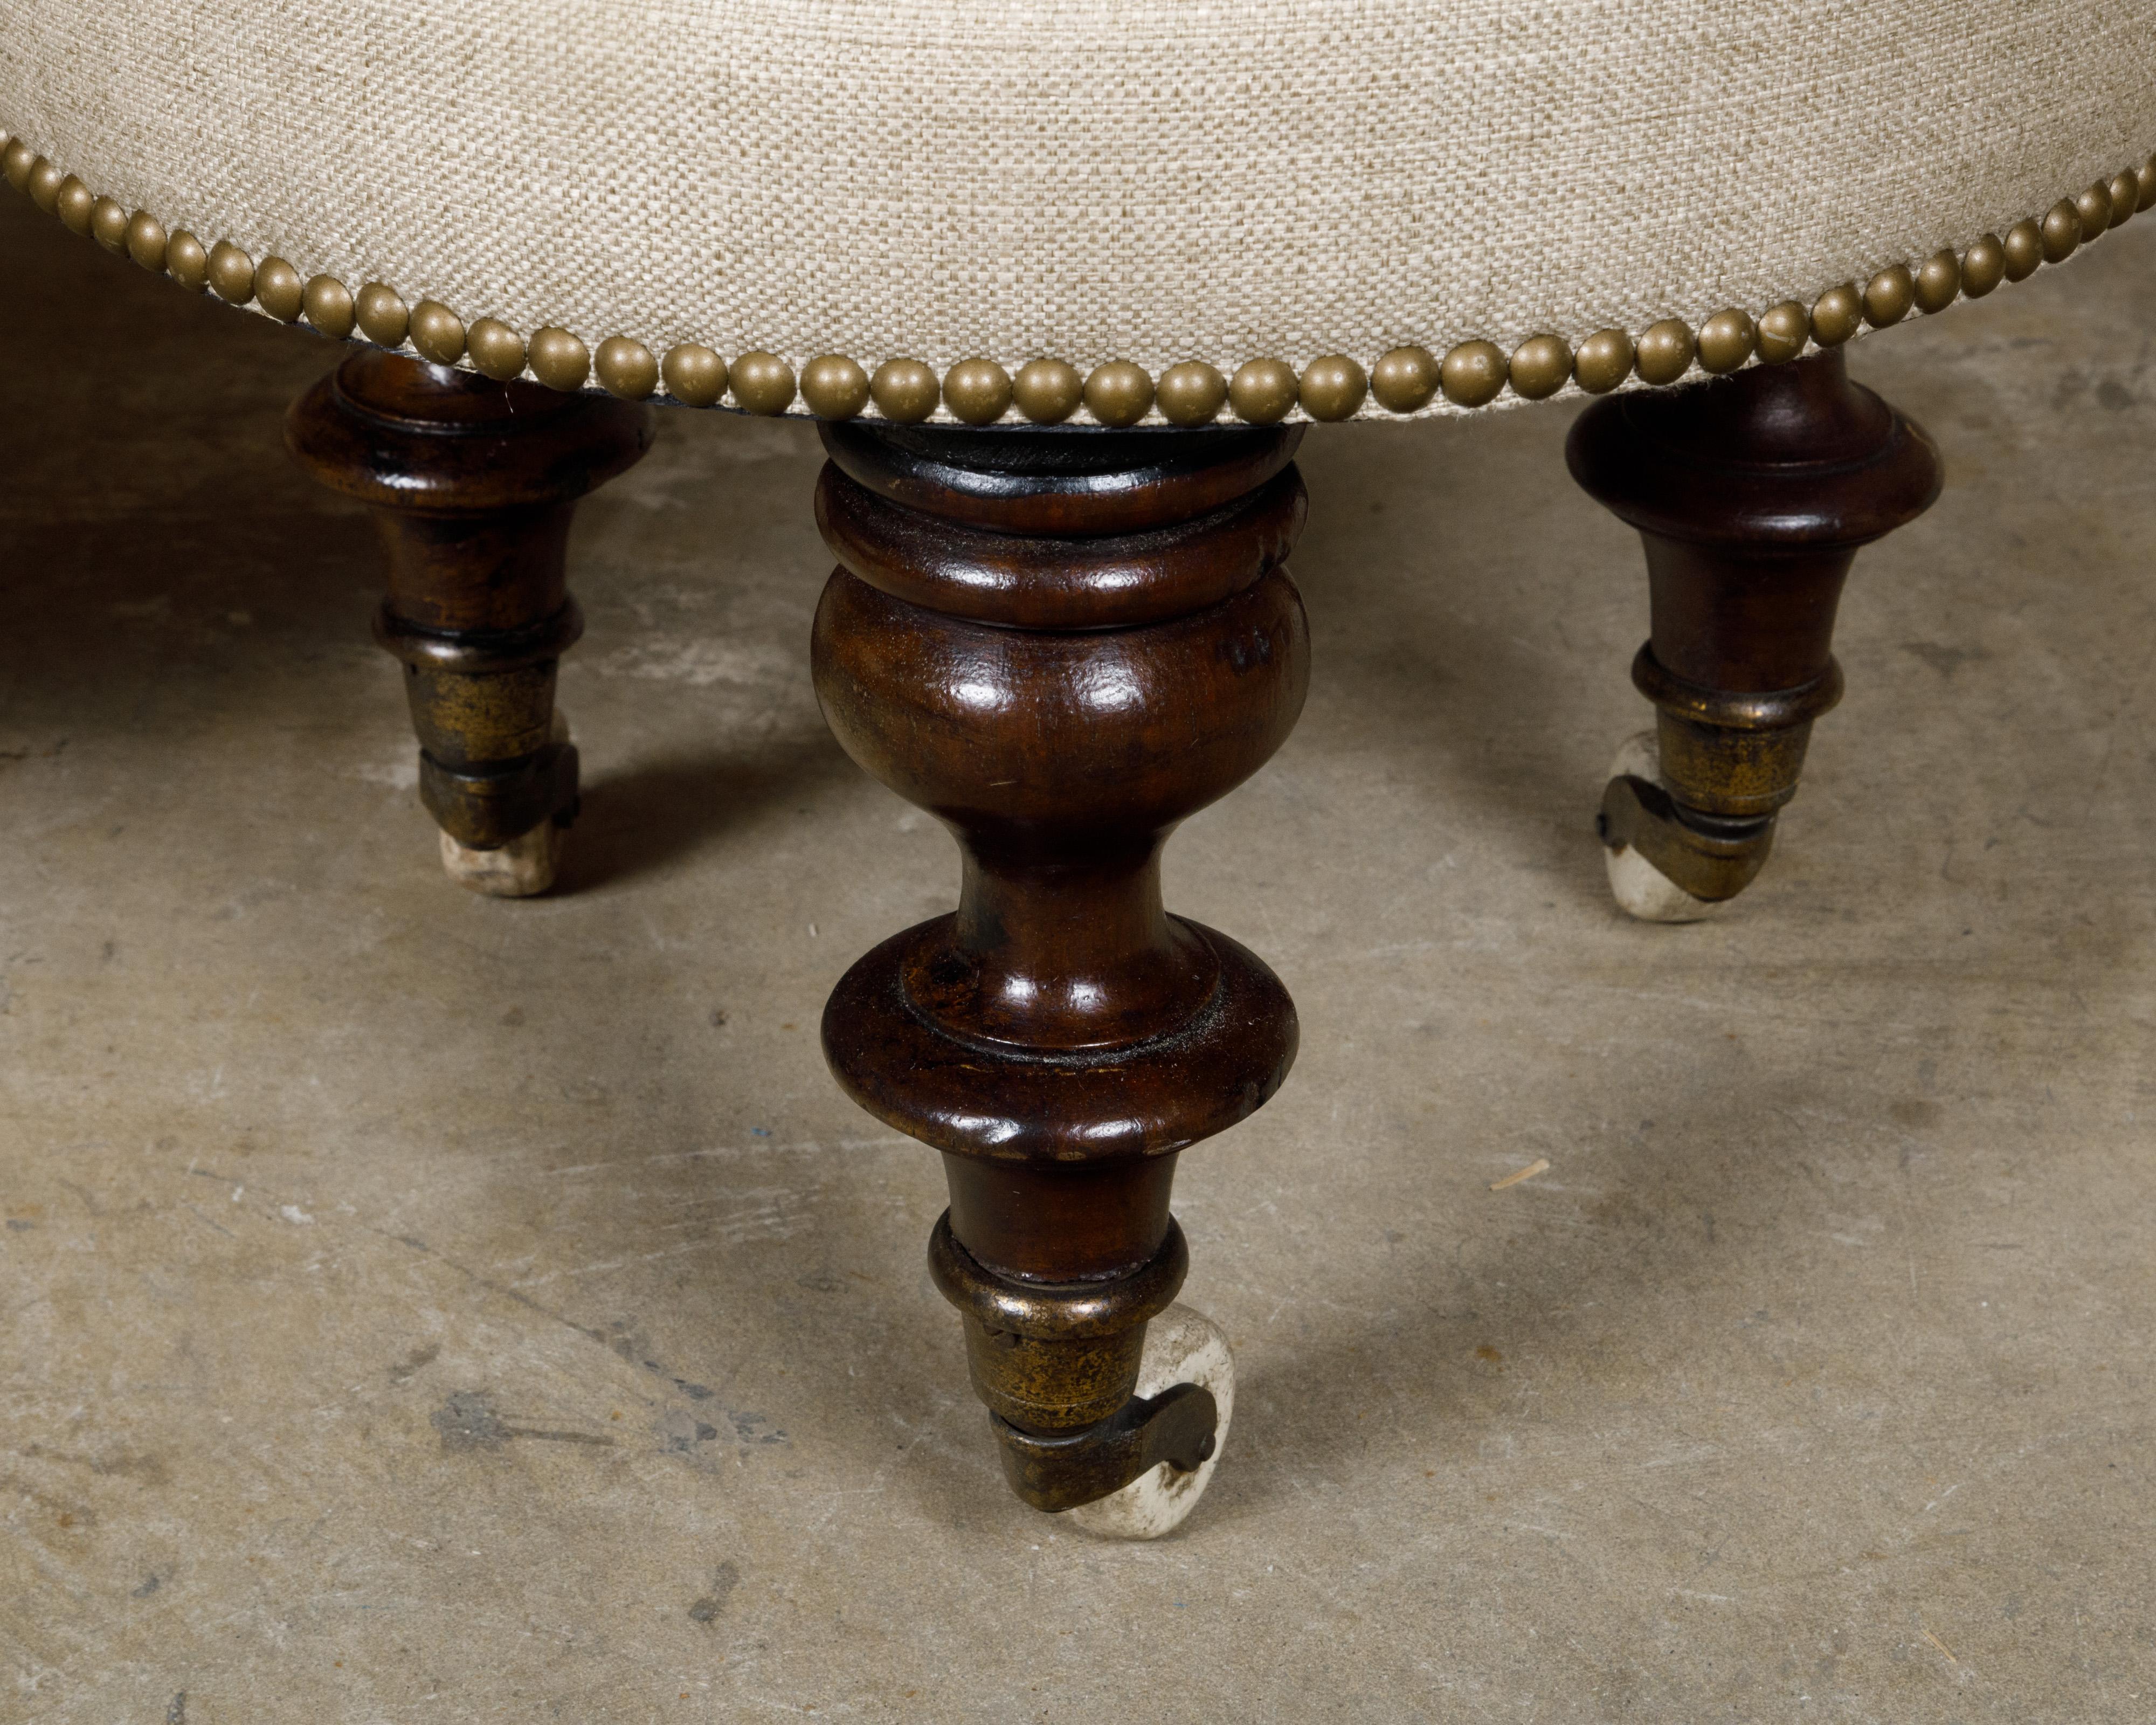 English Mahogany Stools with 19th Century Turned Legs on Casters, a Pair For Sale 2